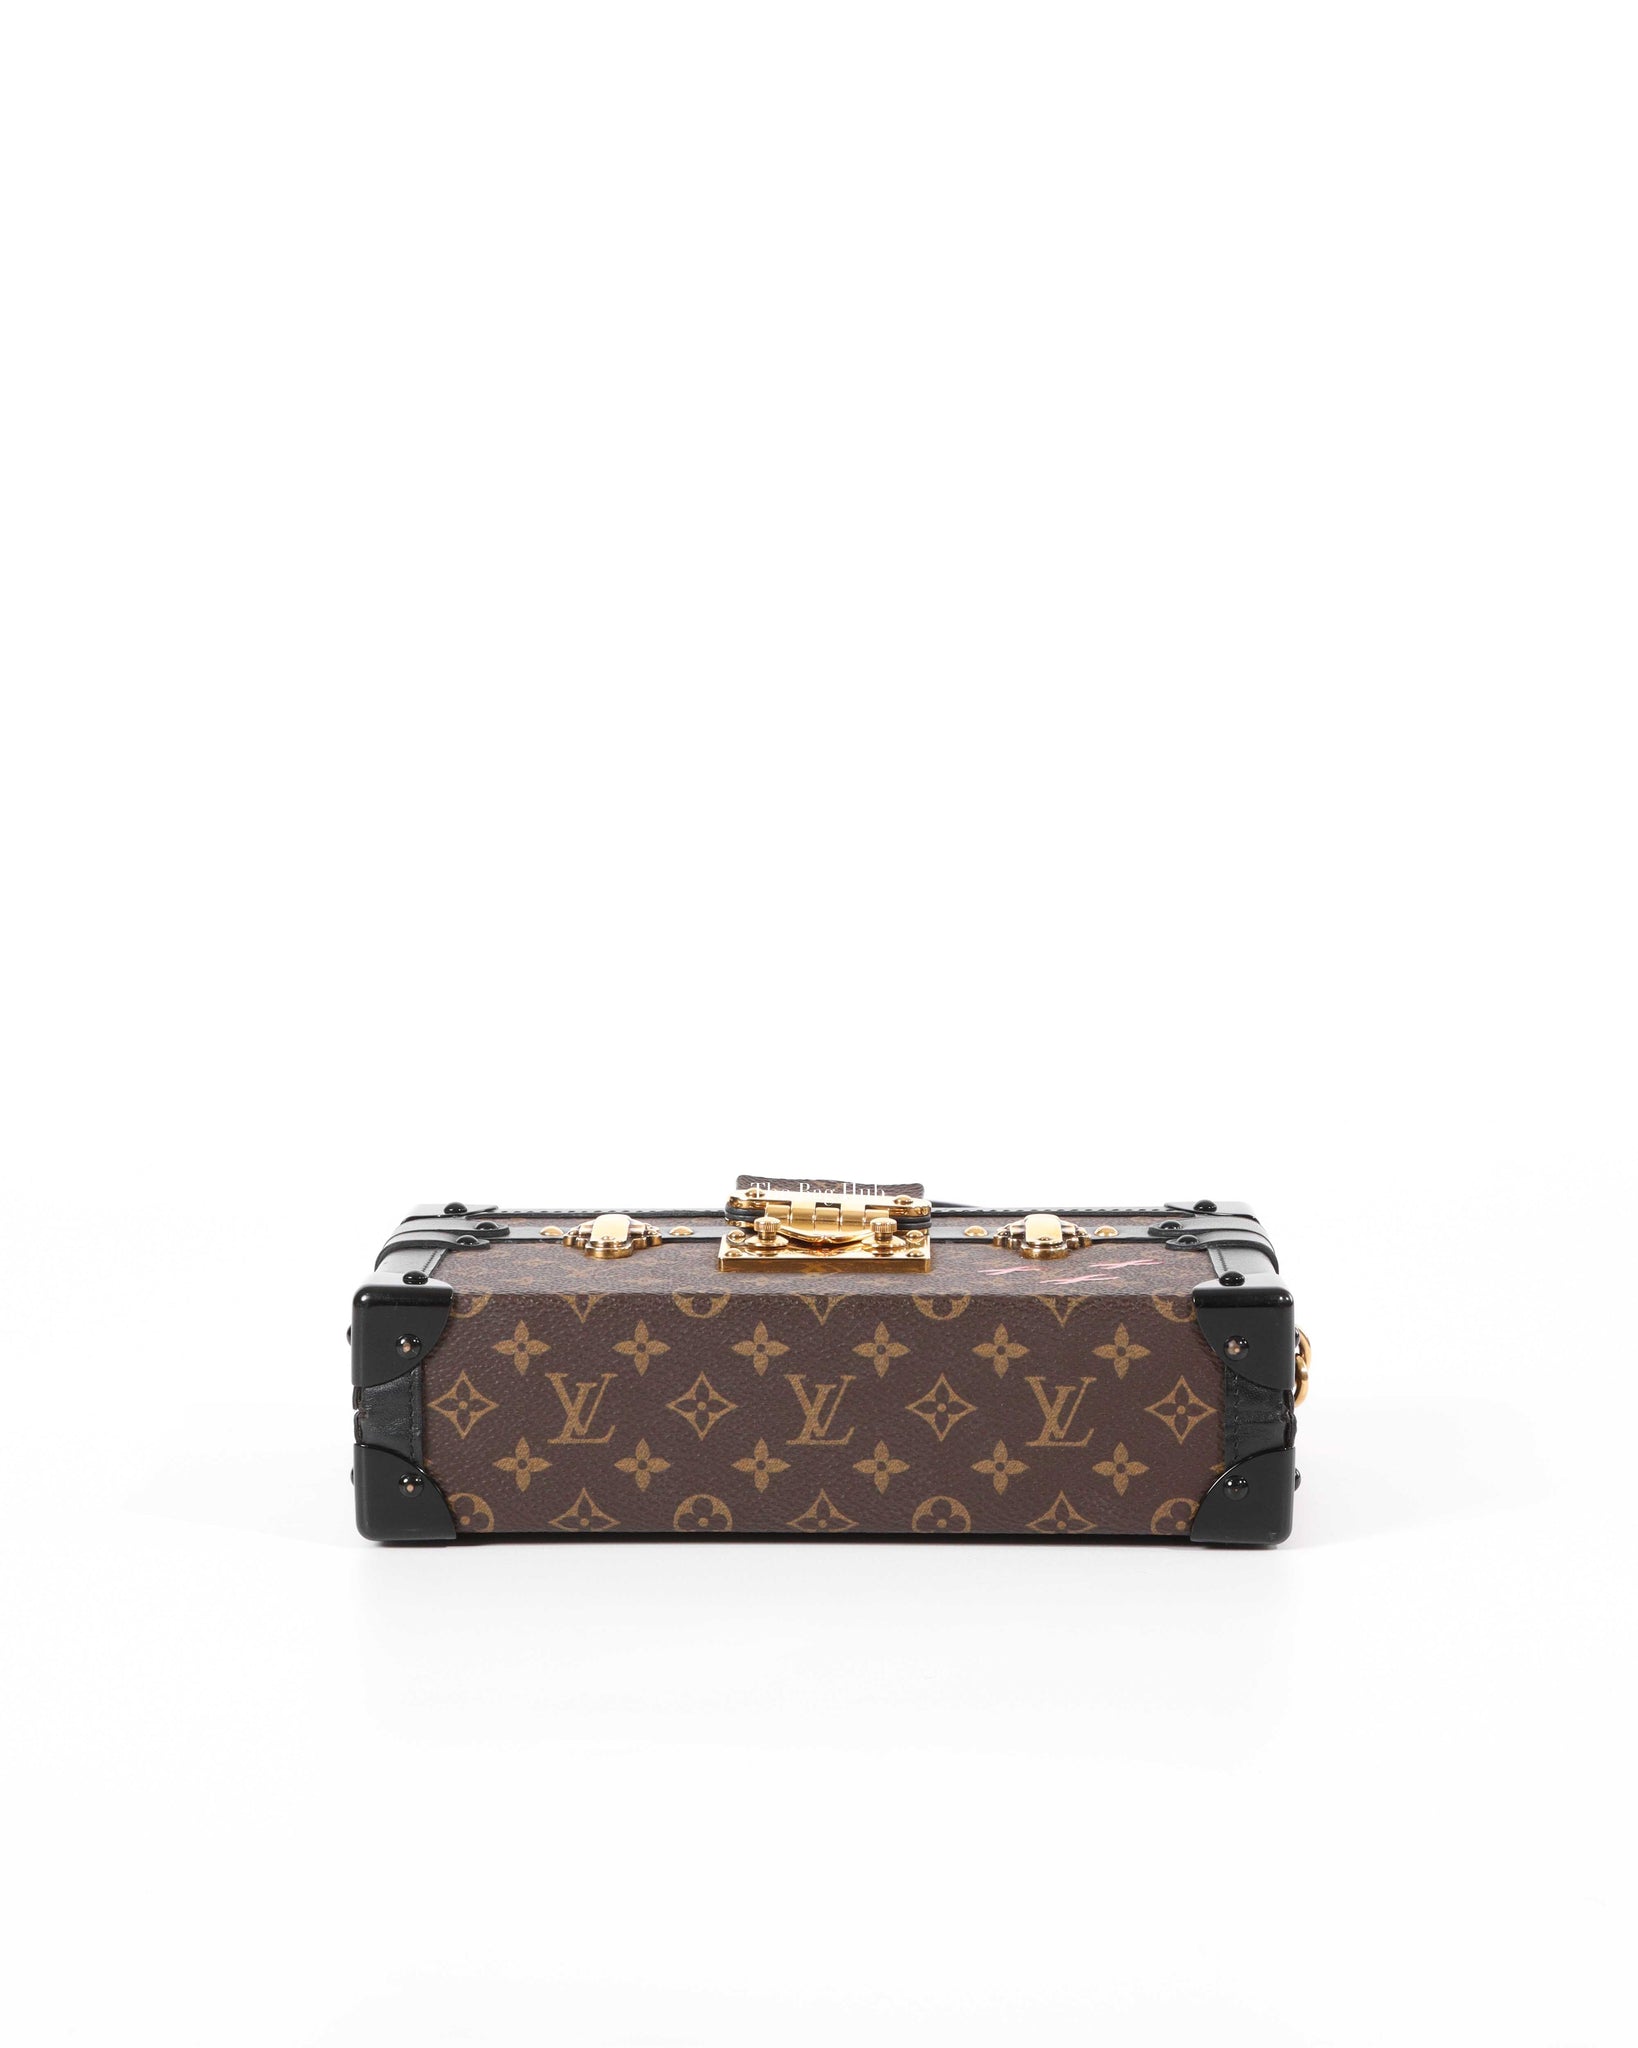 Louis Vuitton Petite Malle, The Mini Trunk With A Massive Legacy